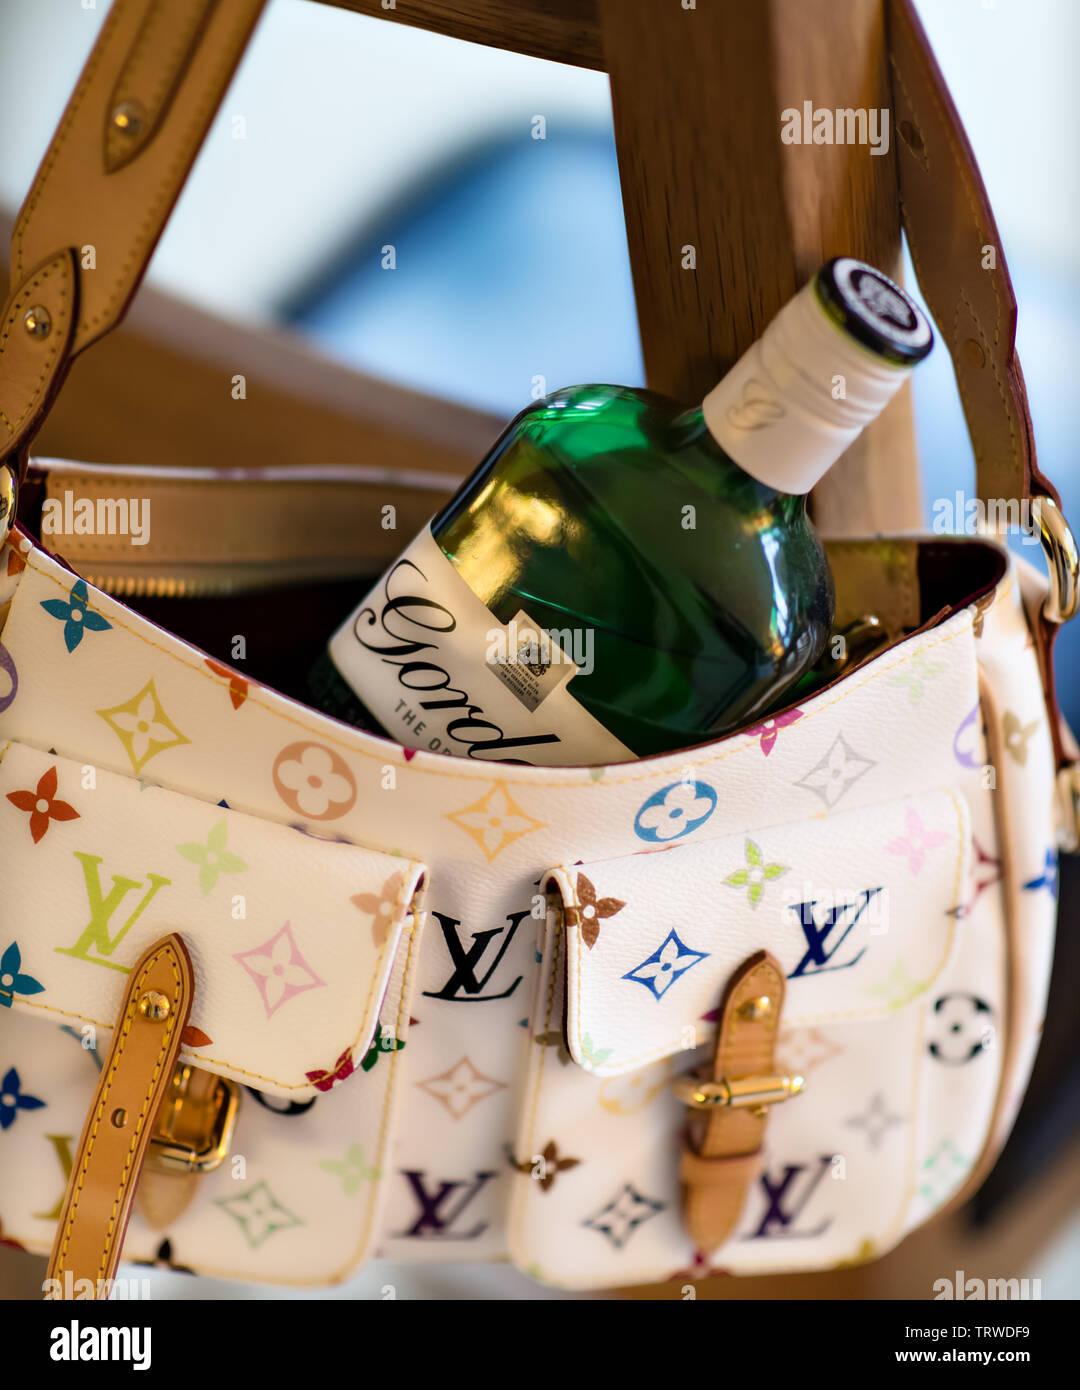 Iconic white Louis Vuitton handbag with a bottle of Gordon's gin hanging on a wooden chair Stock Photo